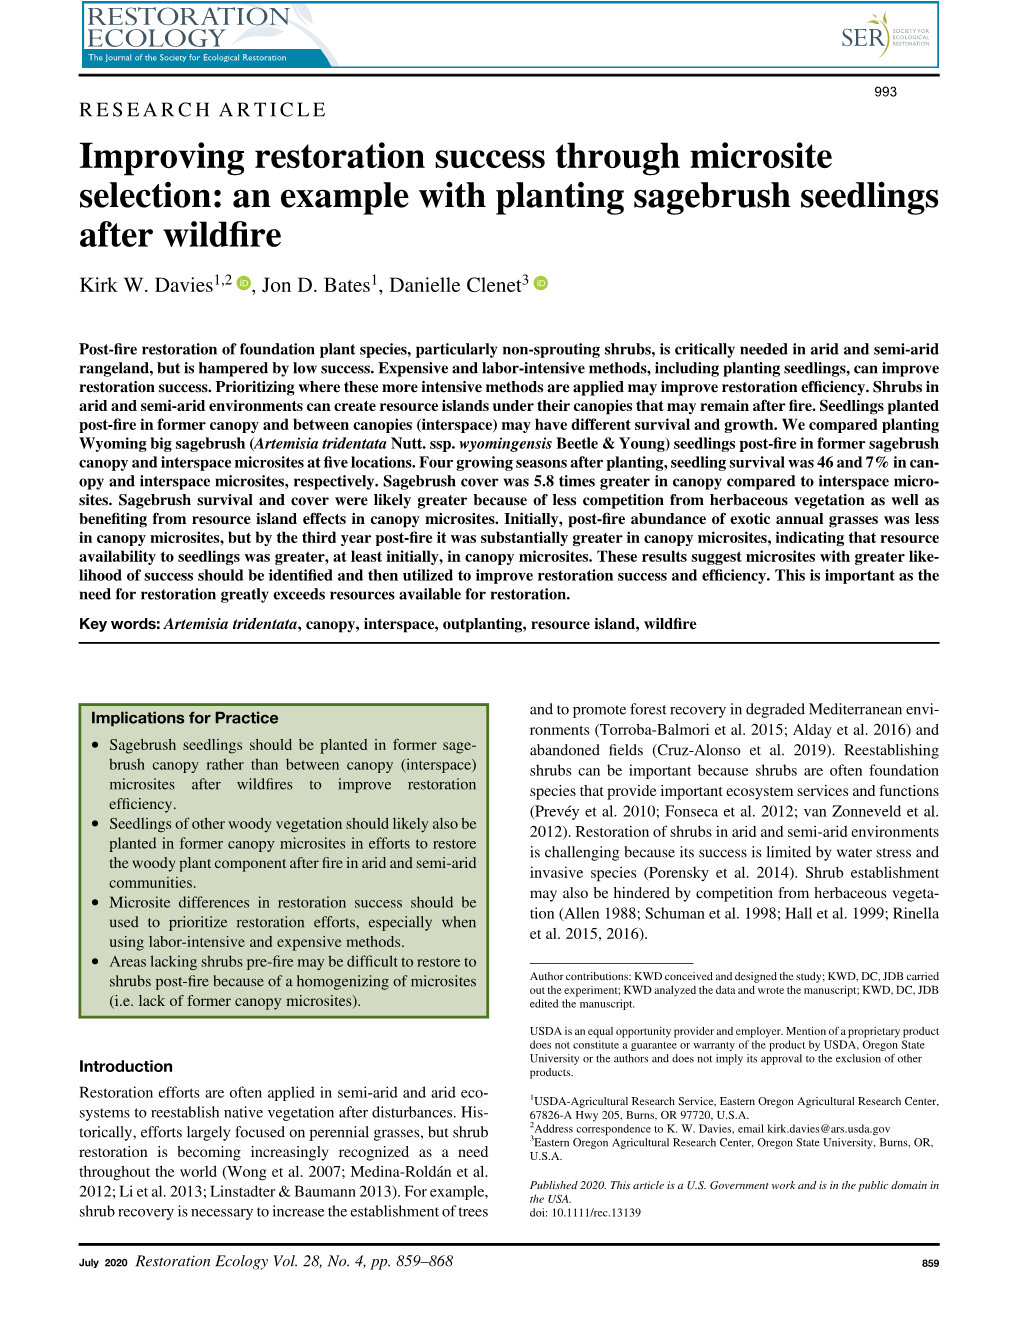 Improving Restoration Success Through Microsite Selection: an Example with Planting Sagebrush Seedlings After Wildﬁre Kirk W